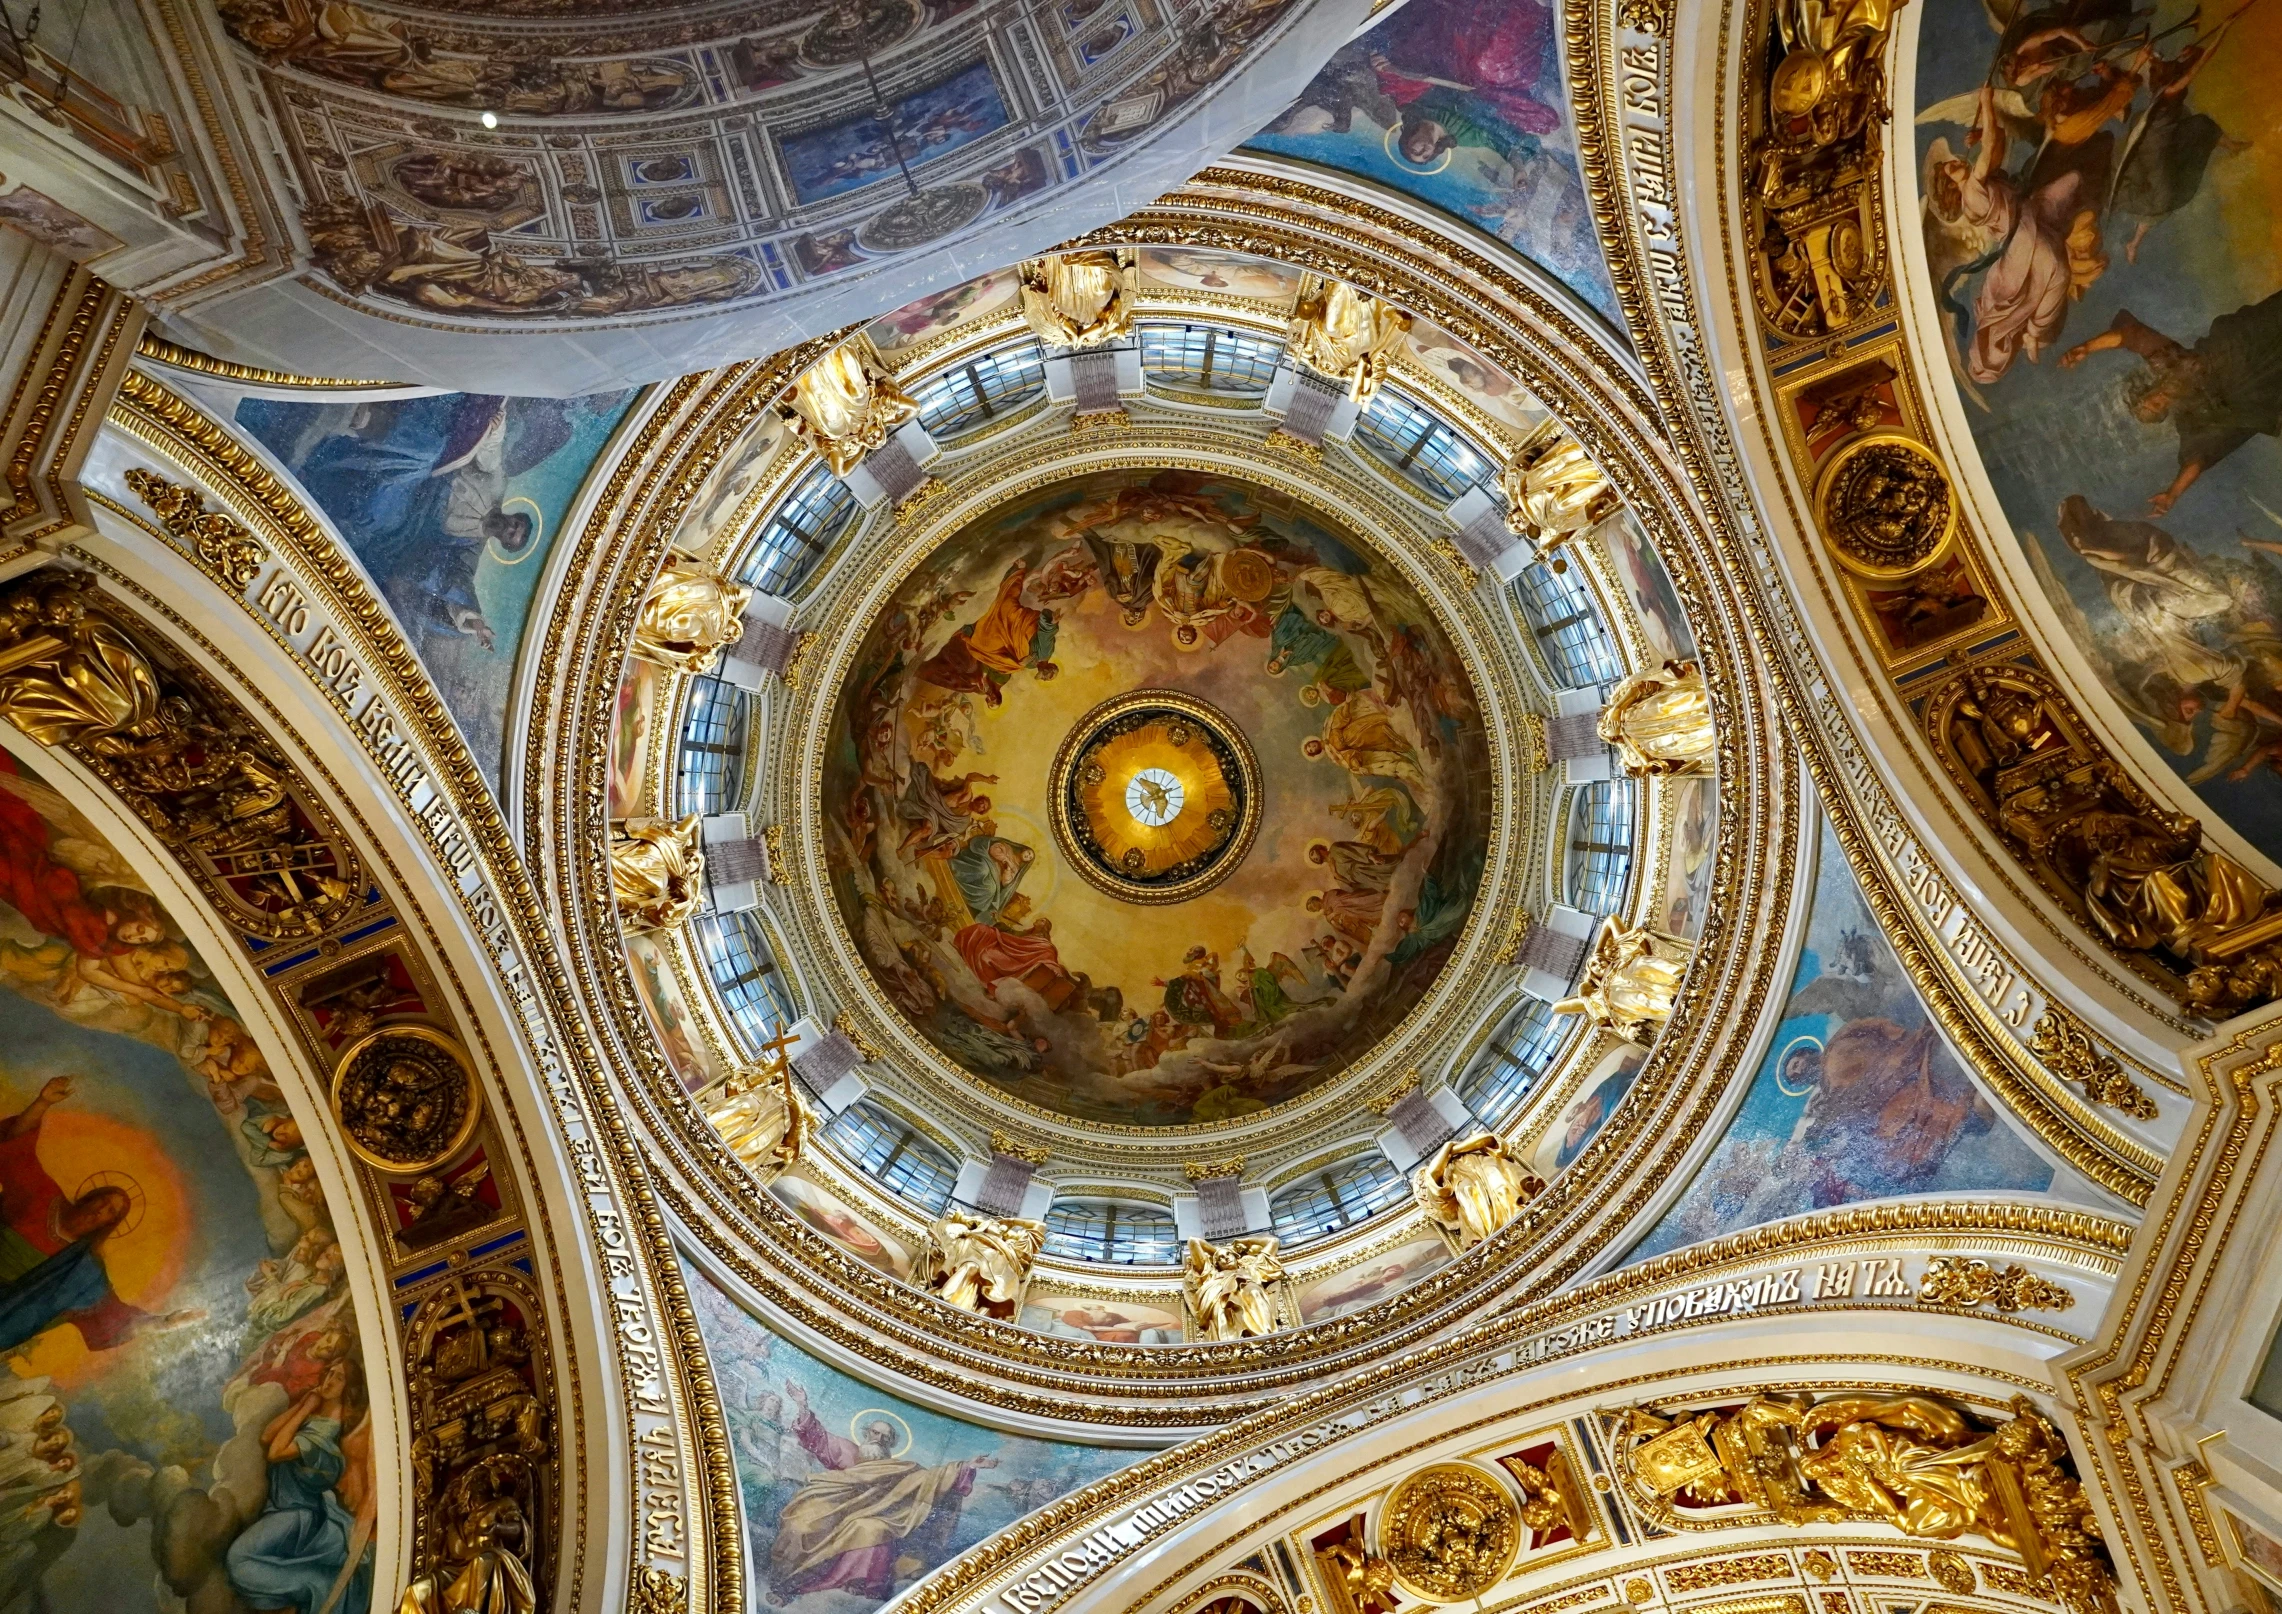 the ceiling of the church has a massive painting on it